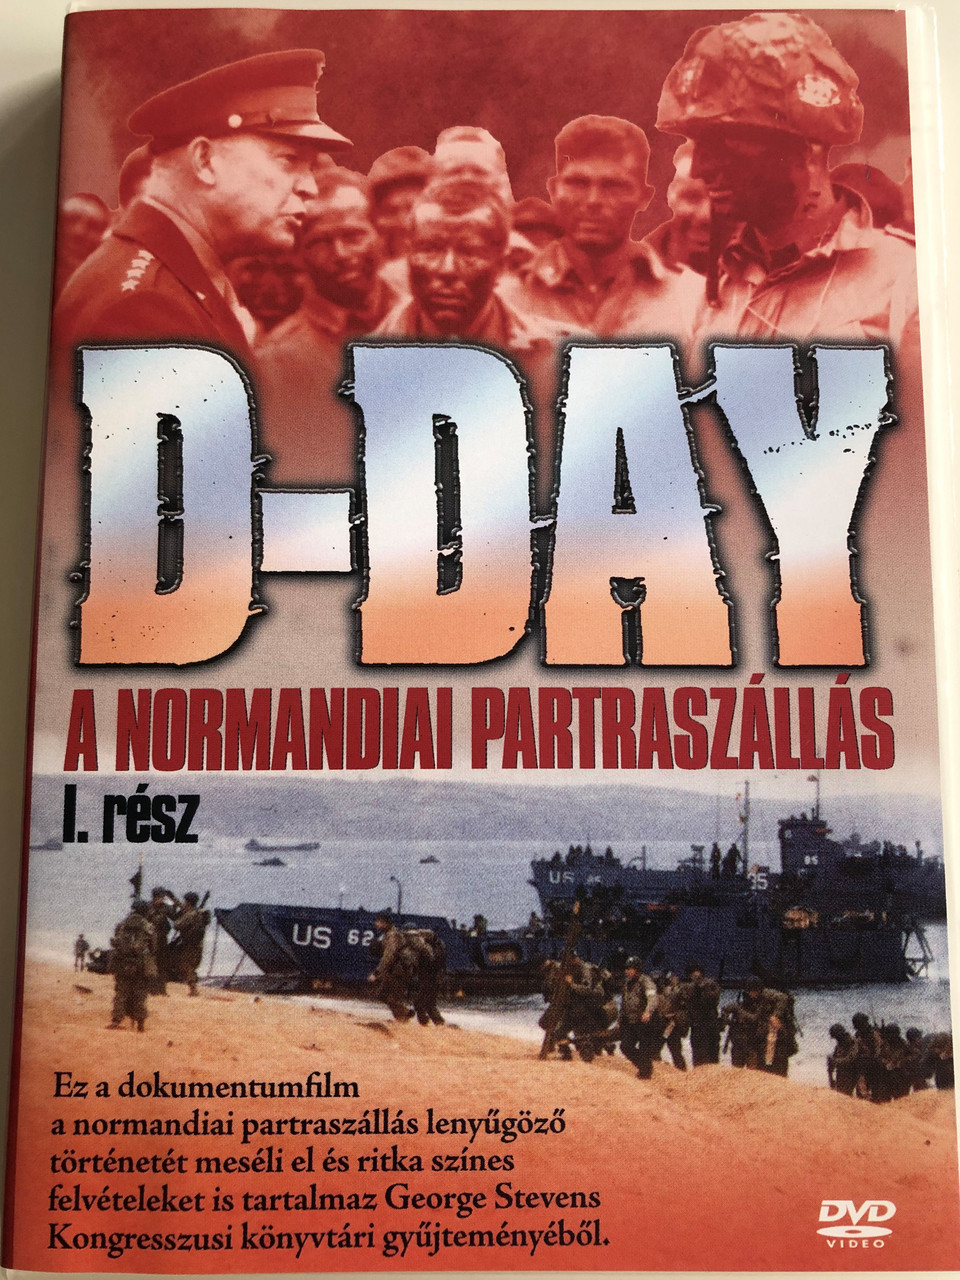 D-Day: Code Name Overlord DVD 1998 A normandiai Partraszállás I. rész /  Documentary about D-Day Part 1 / Directed by Lanny Lee / Rare color footage  from George Stevens' Congress Library collection - bibleinmylanguage